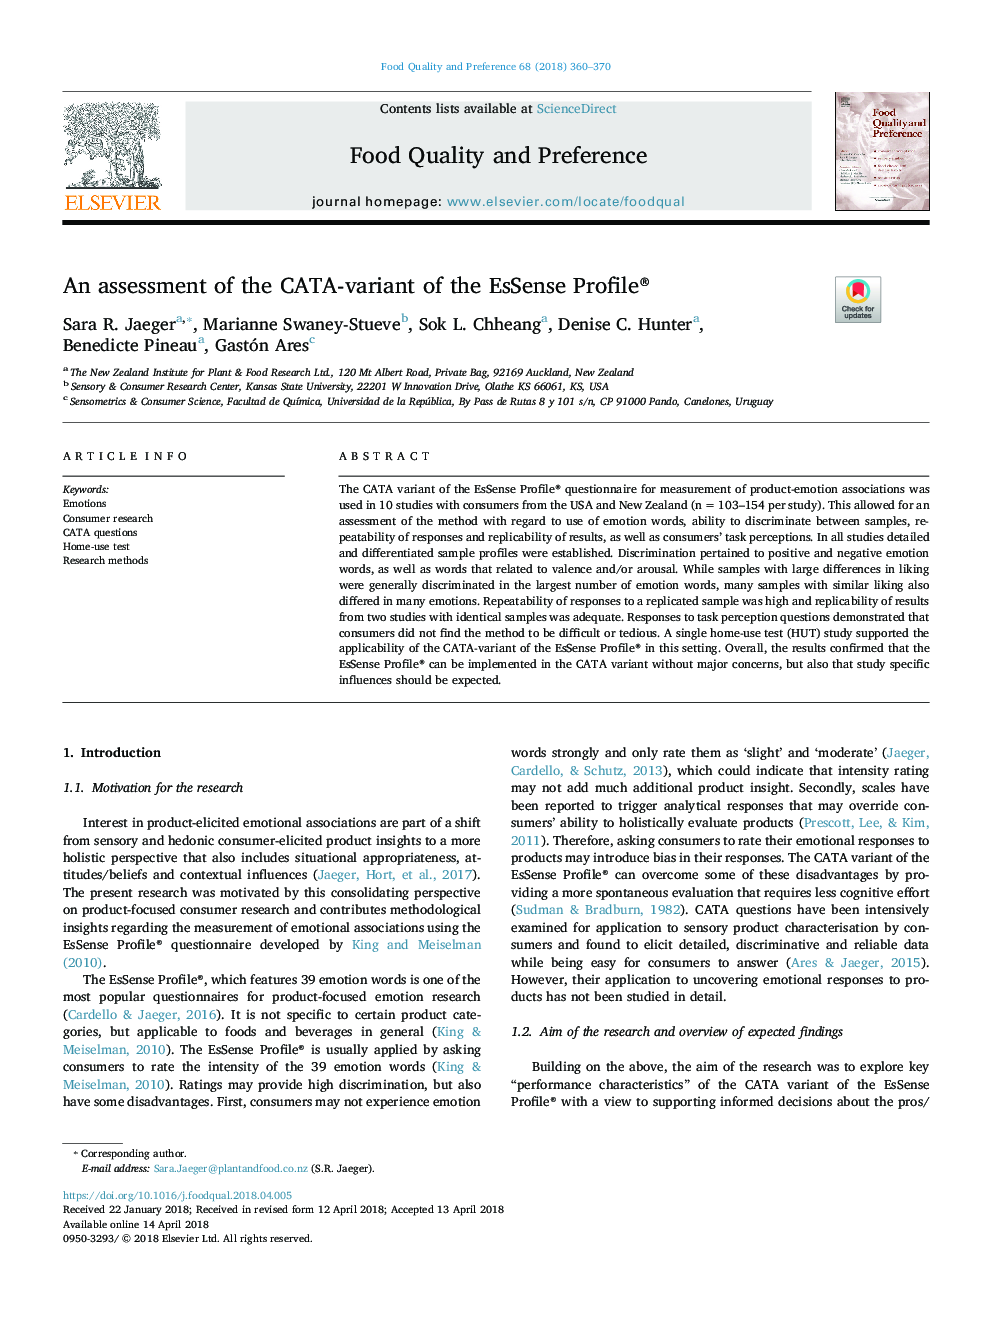 An assessment of the CATA-variant of the EsSense Profile®